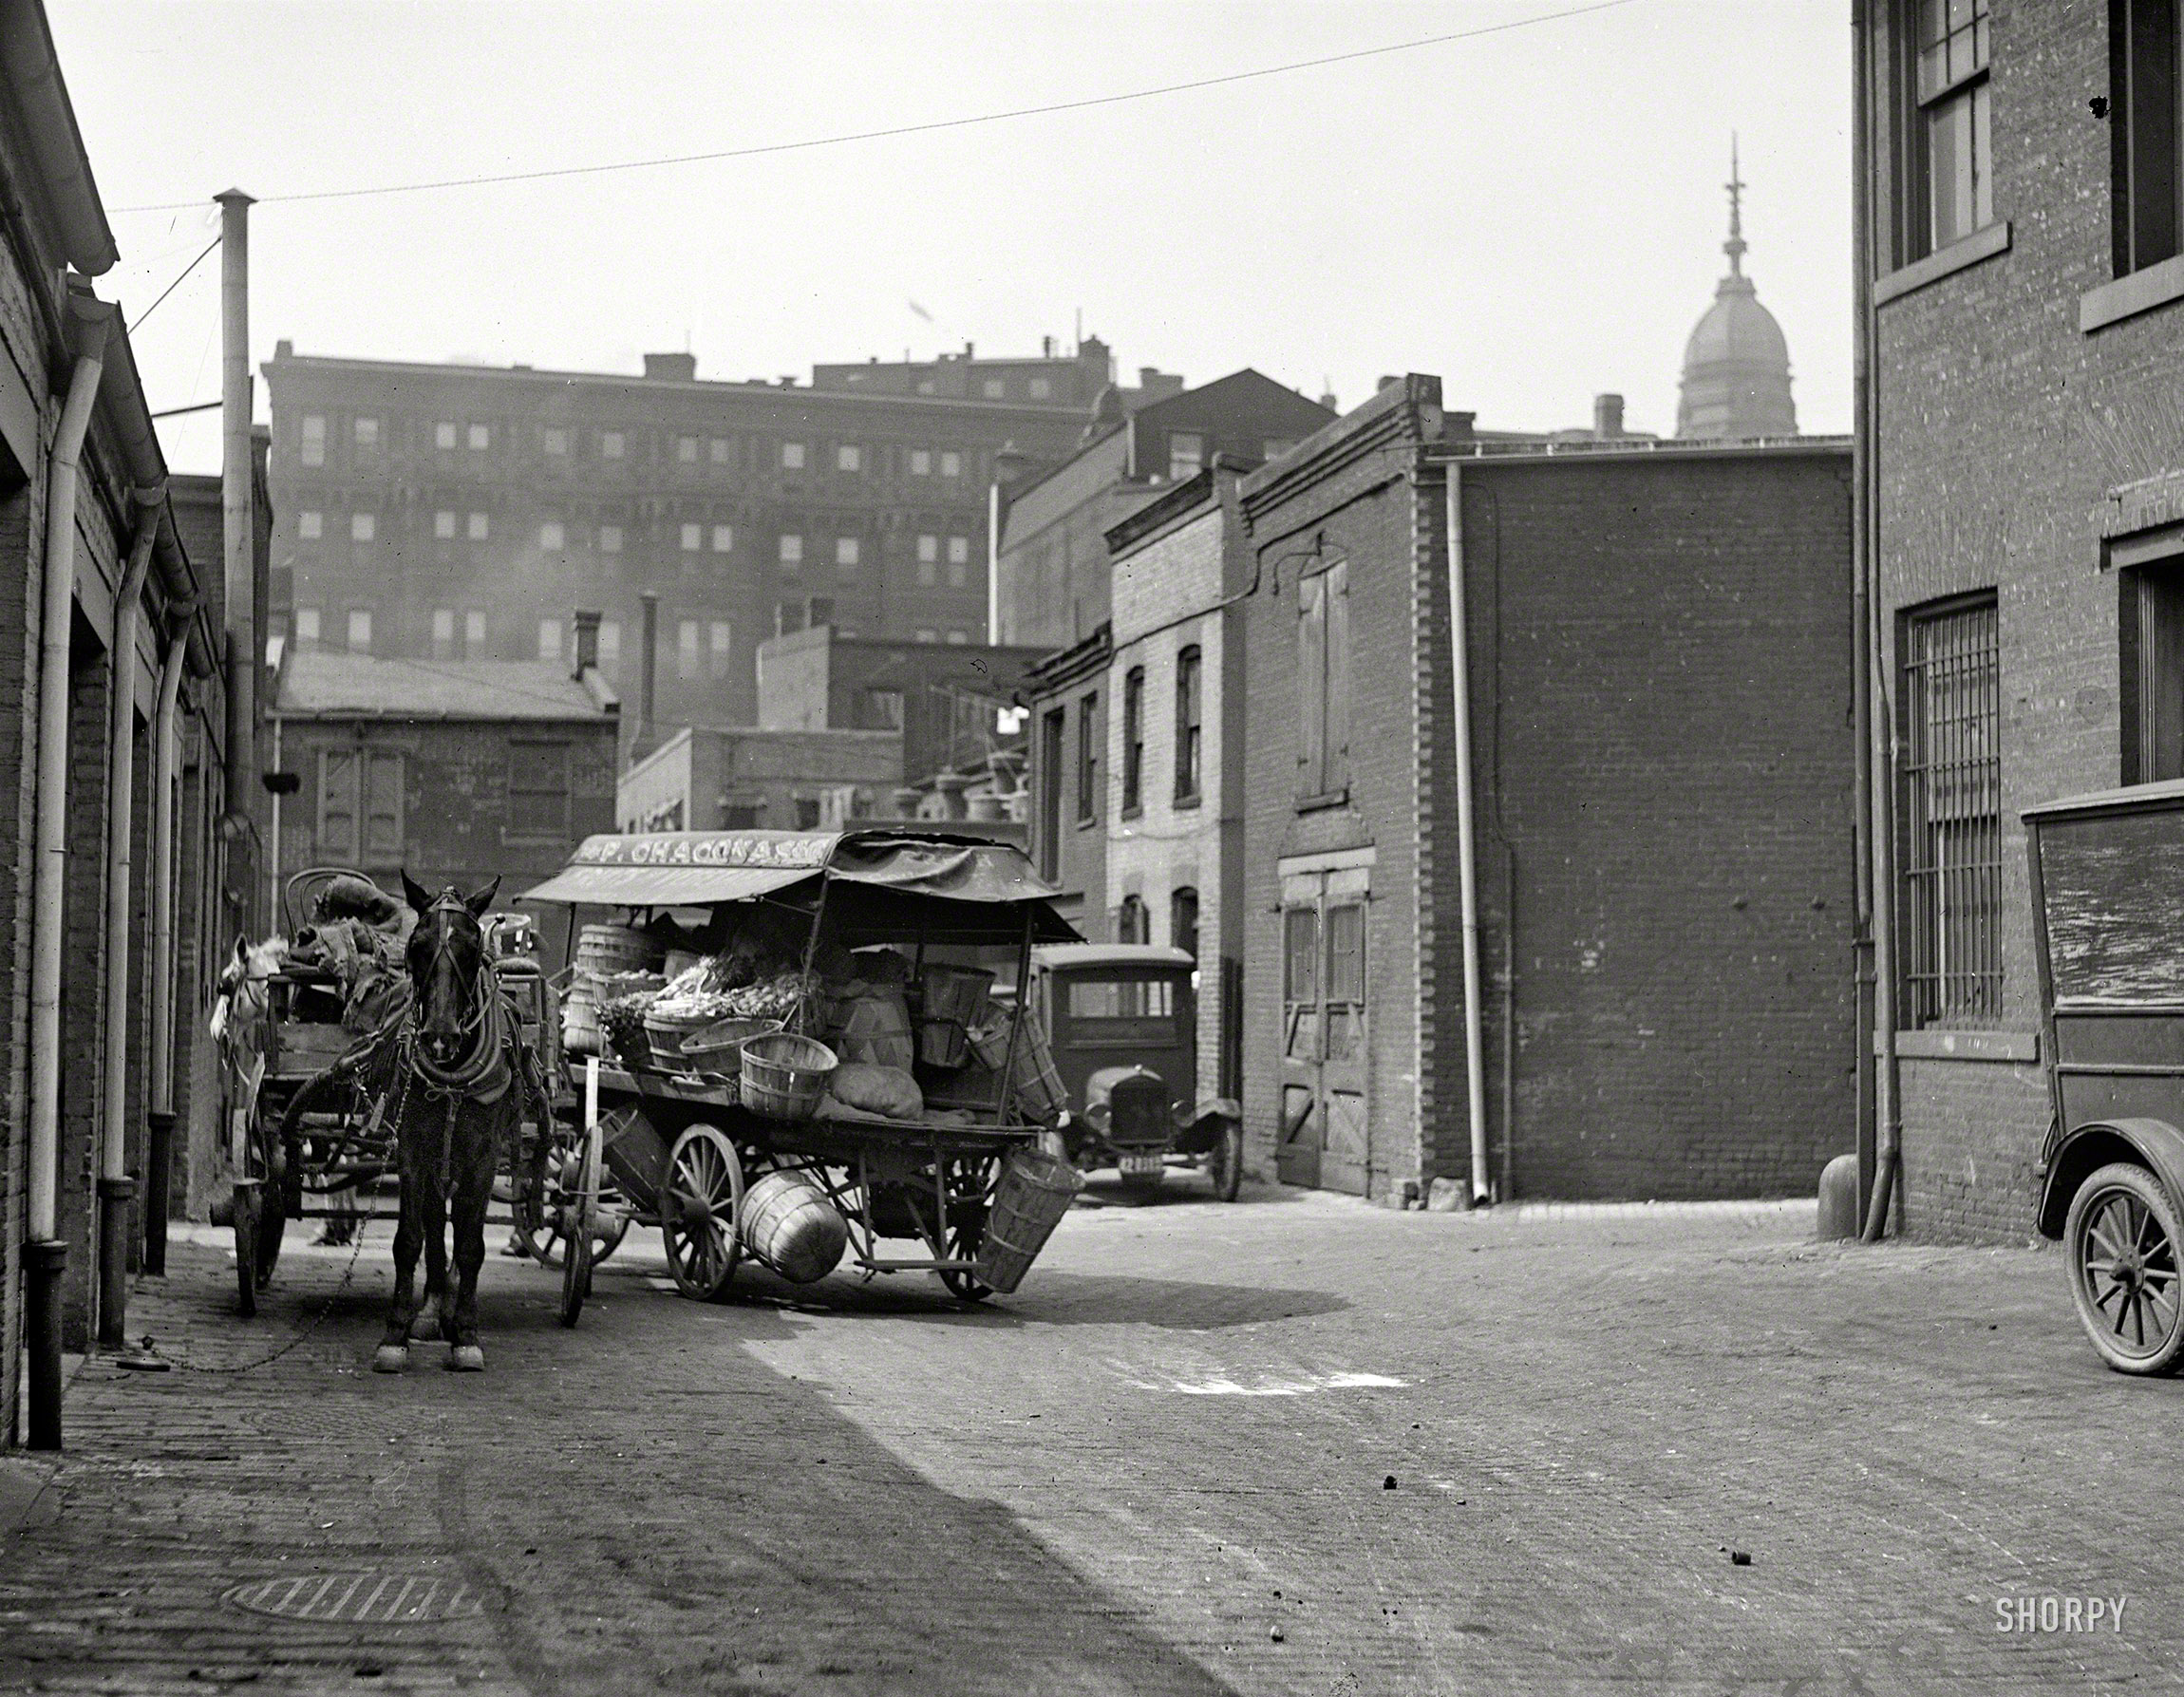 "Produce wagon in city, 1923." One in a series of Harris & Ewing plates showing the alleys and backstreets of Washington, D.C. The subject here is a Chaconas grocery wagon. Who can identify the dome? 4x5 glass negative. View full size.